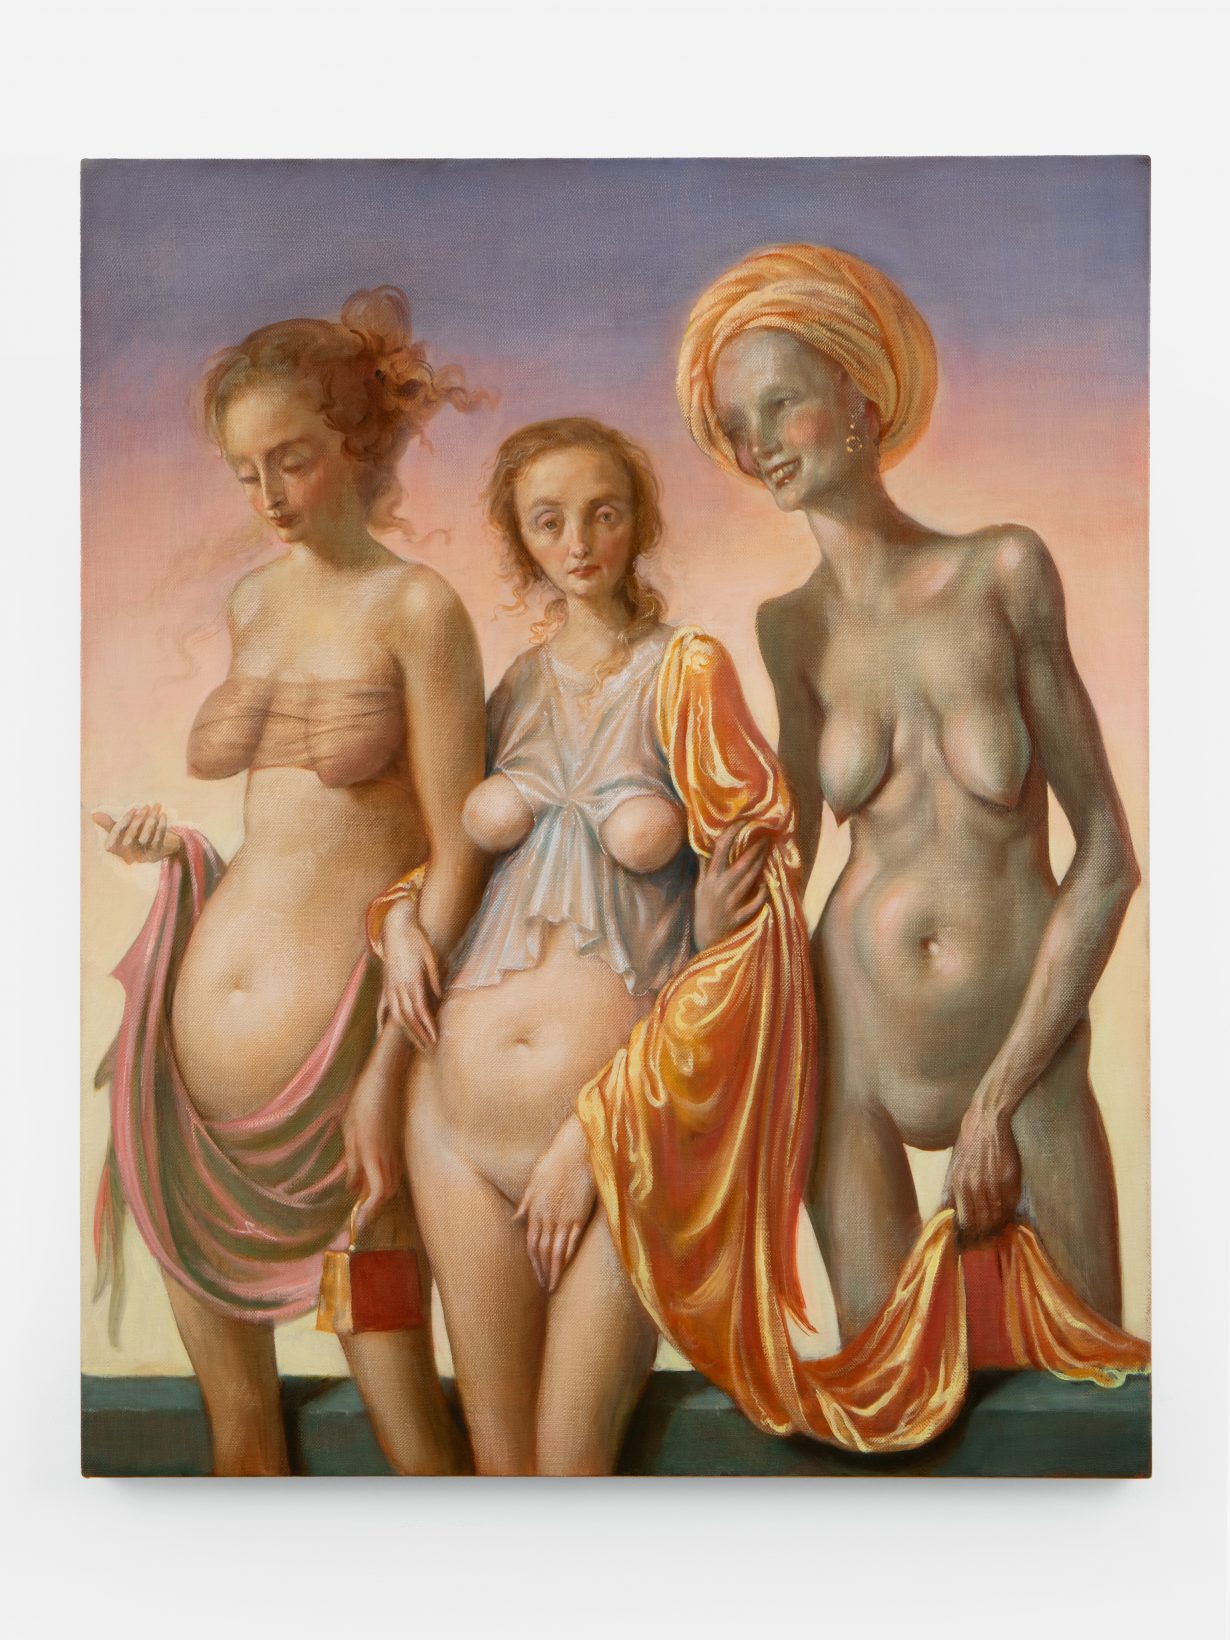 Www Australian Hot Sex Hq Video Com - John Currin's Paintings Are Disgusting and Amoral. That's Why They're So  Good - ArtReview